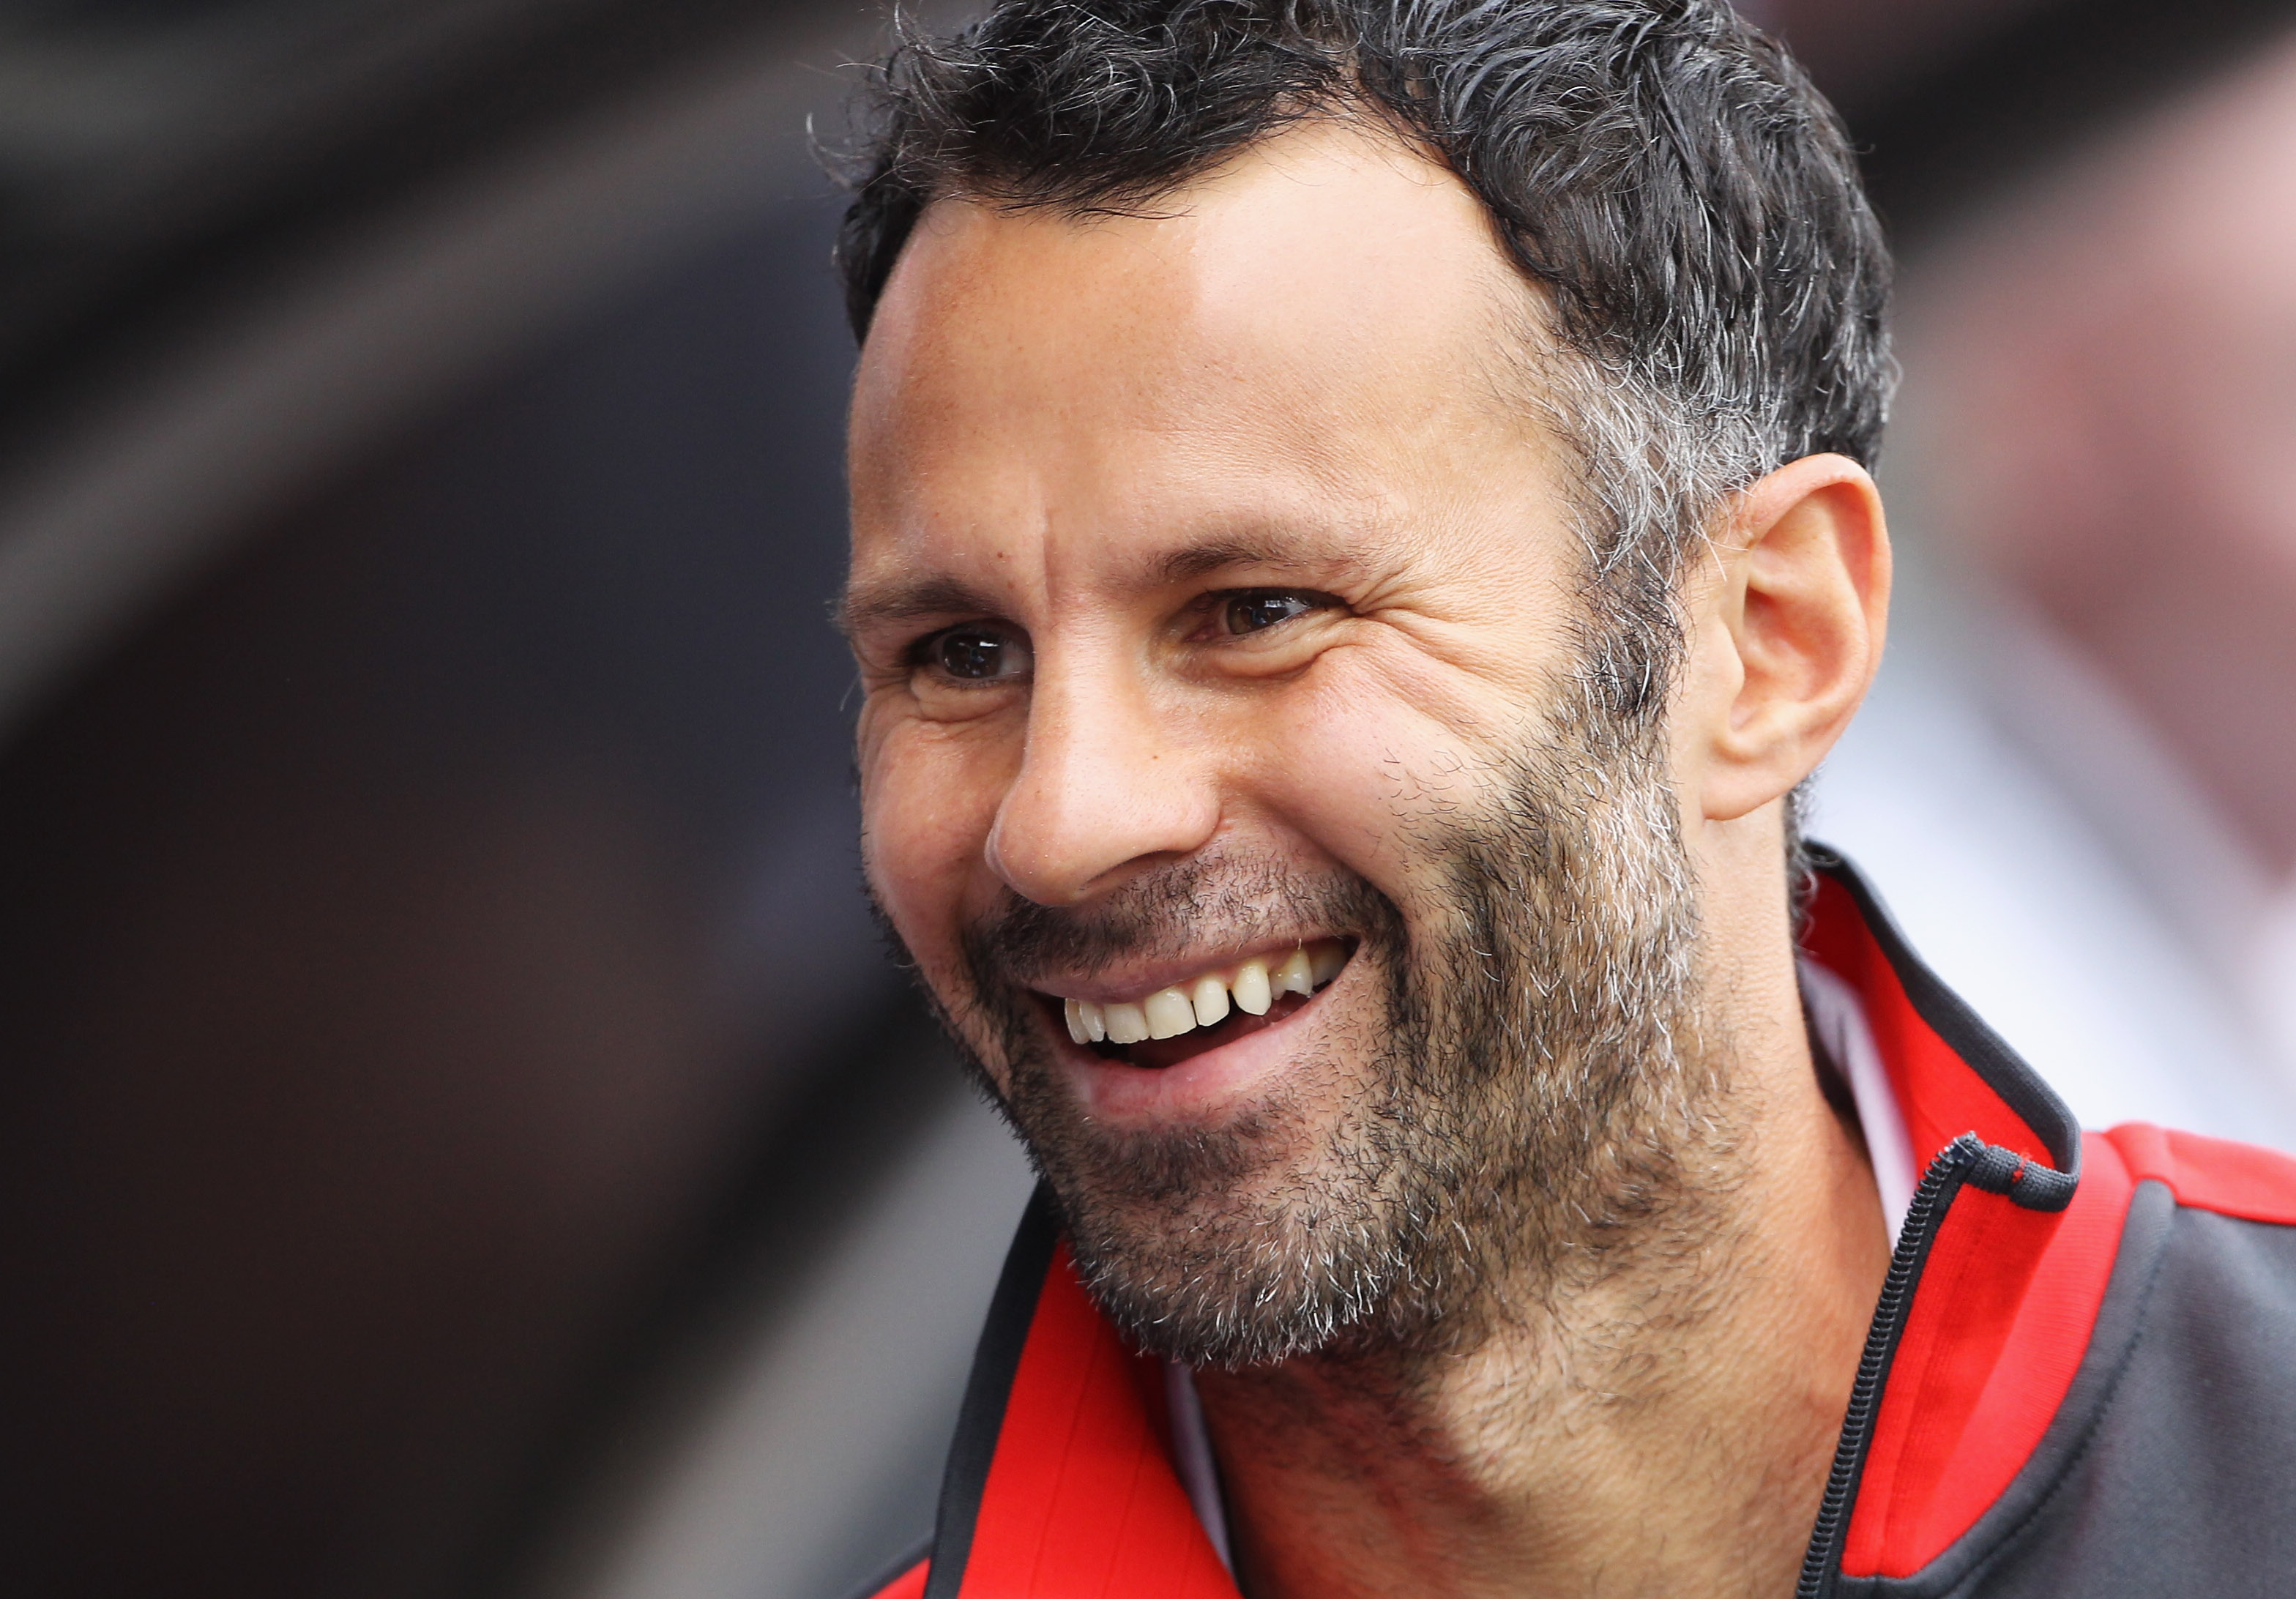 LONDON, ENGLAND - AUGUST 22:  Ryan Giggs of Manchester United looks on prior to the Barclays Premier League match between Fulham and Manchester United at Craven Cottage on August 22, 2010 in London, England.  (Photo by Phil Cole/Getty Images)